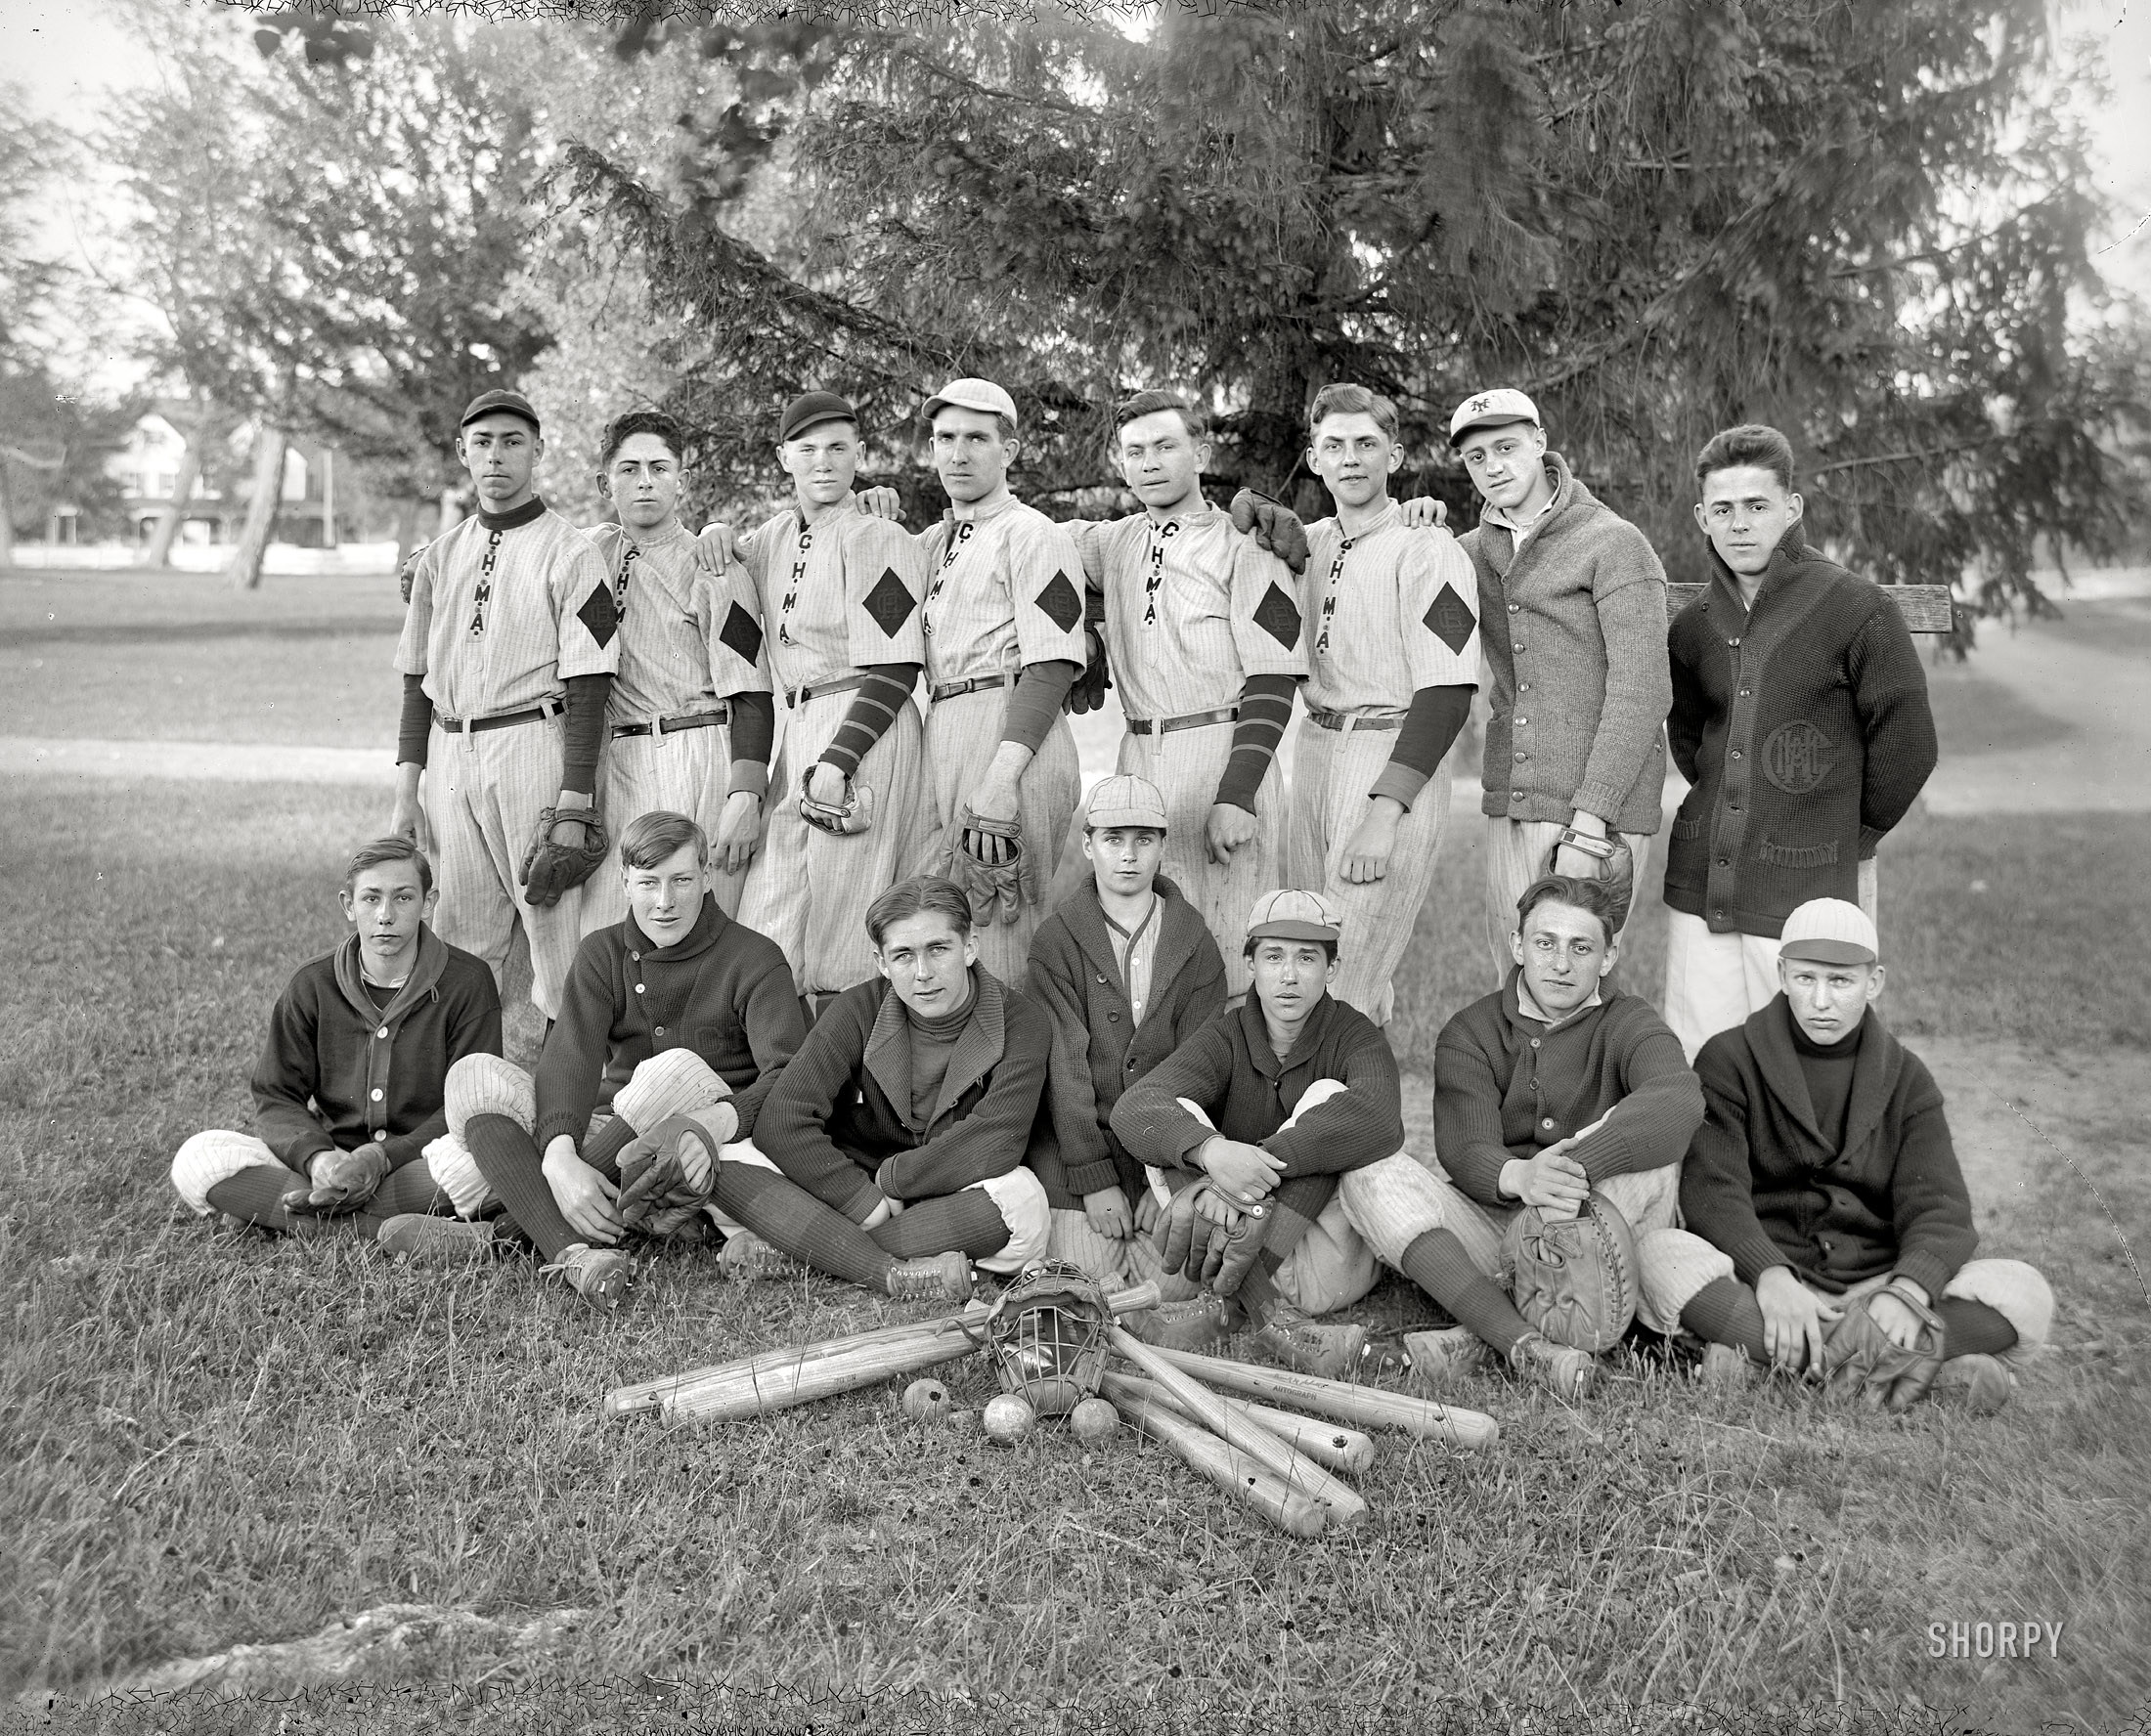 St. Mary's County, Maryland, circa 1920. "Charlotte Hall Military Academy baseball." Harris & Ewing Collection glass negative. View full size.